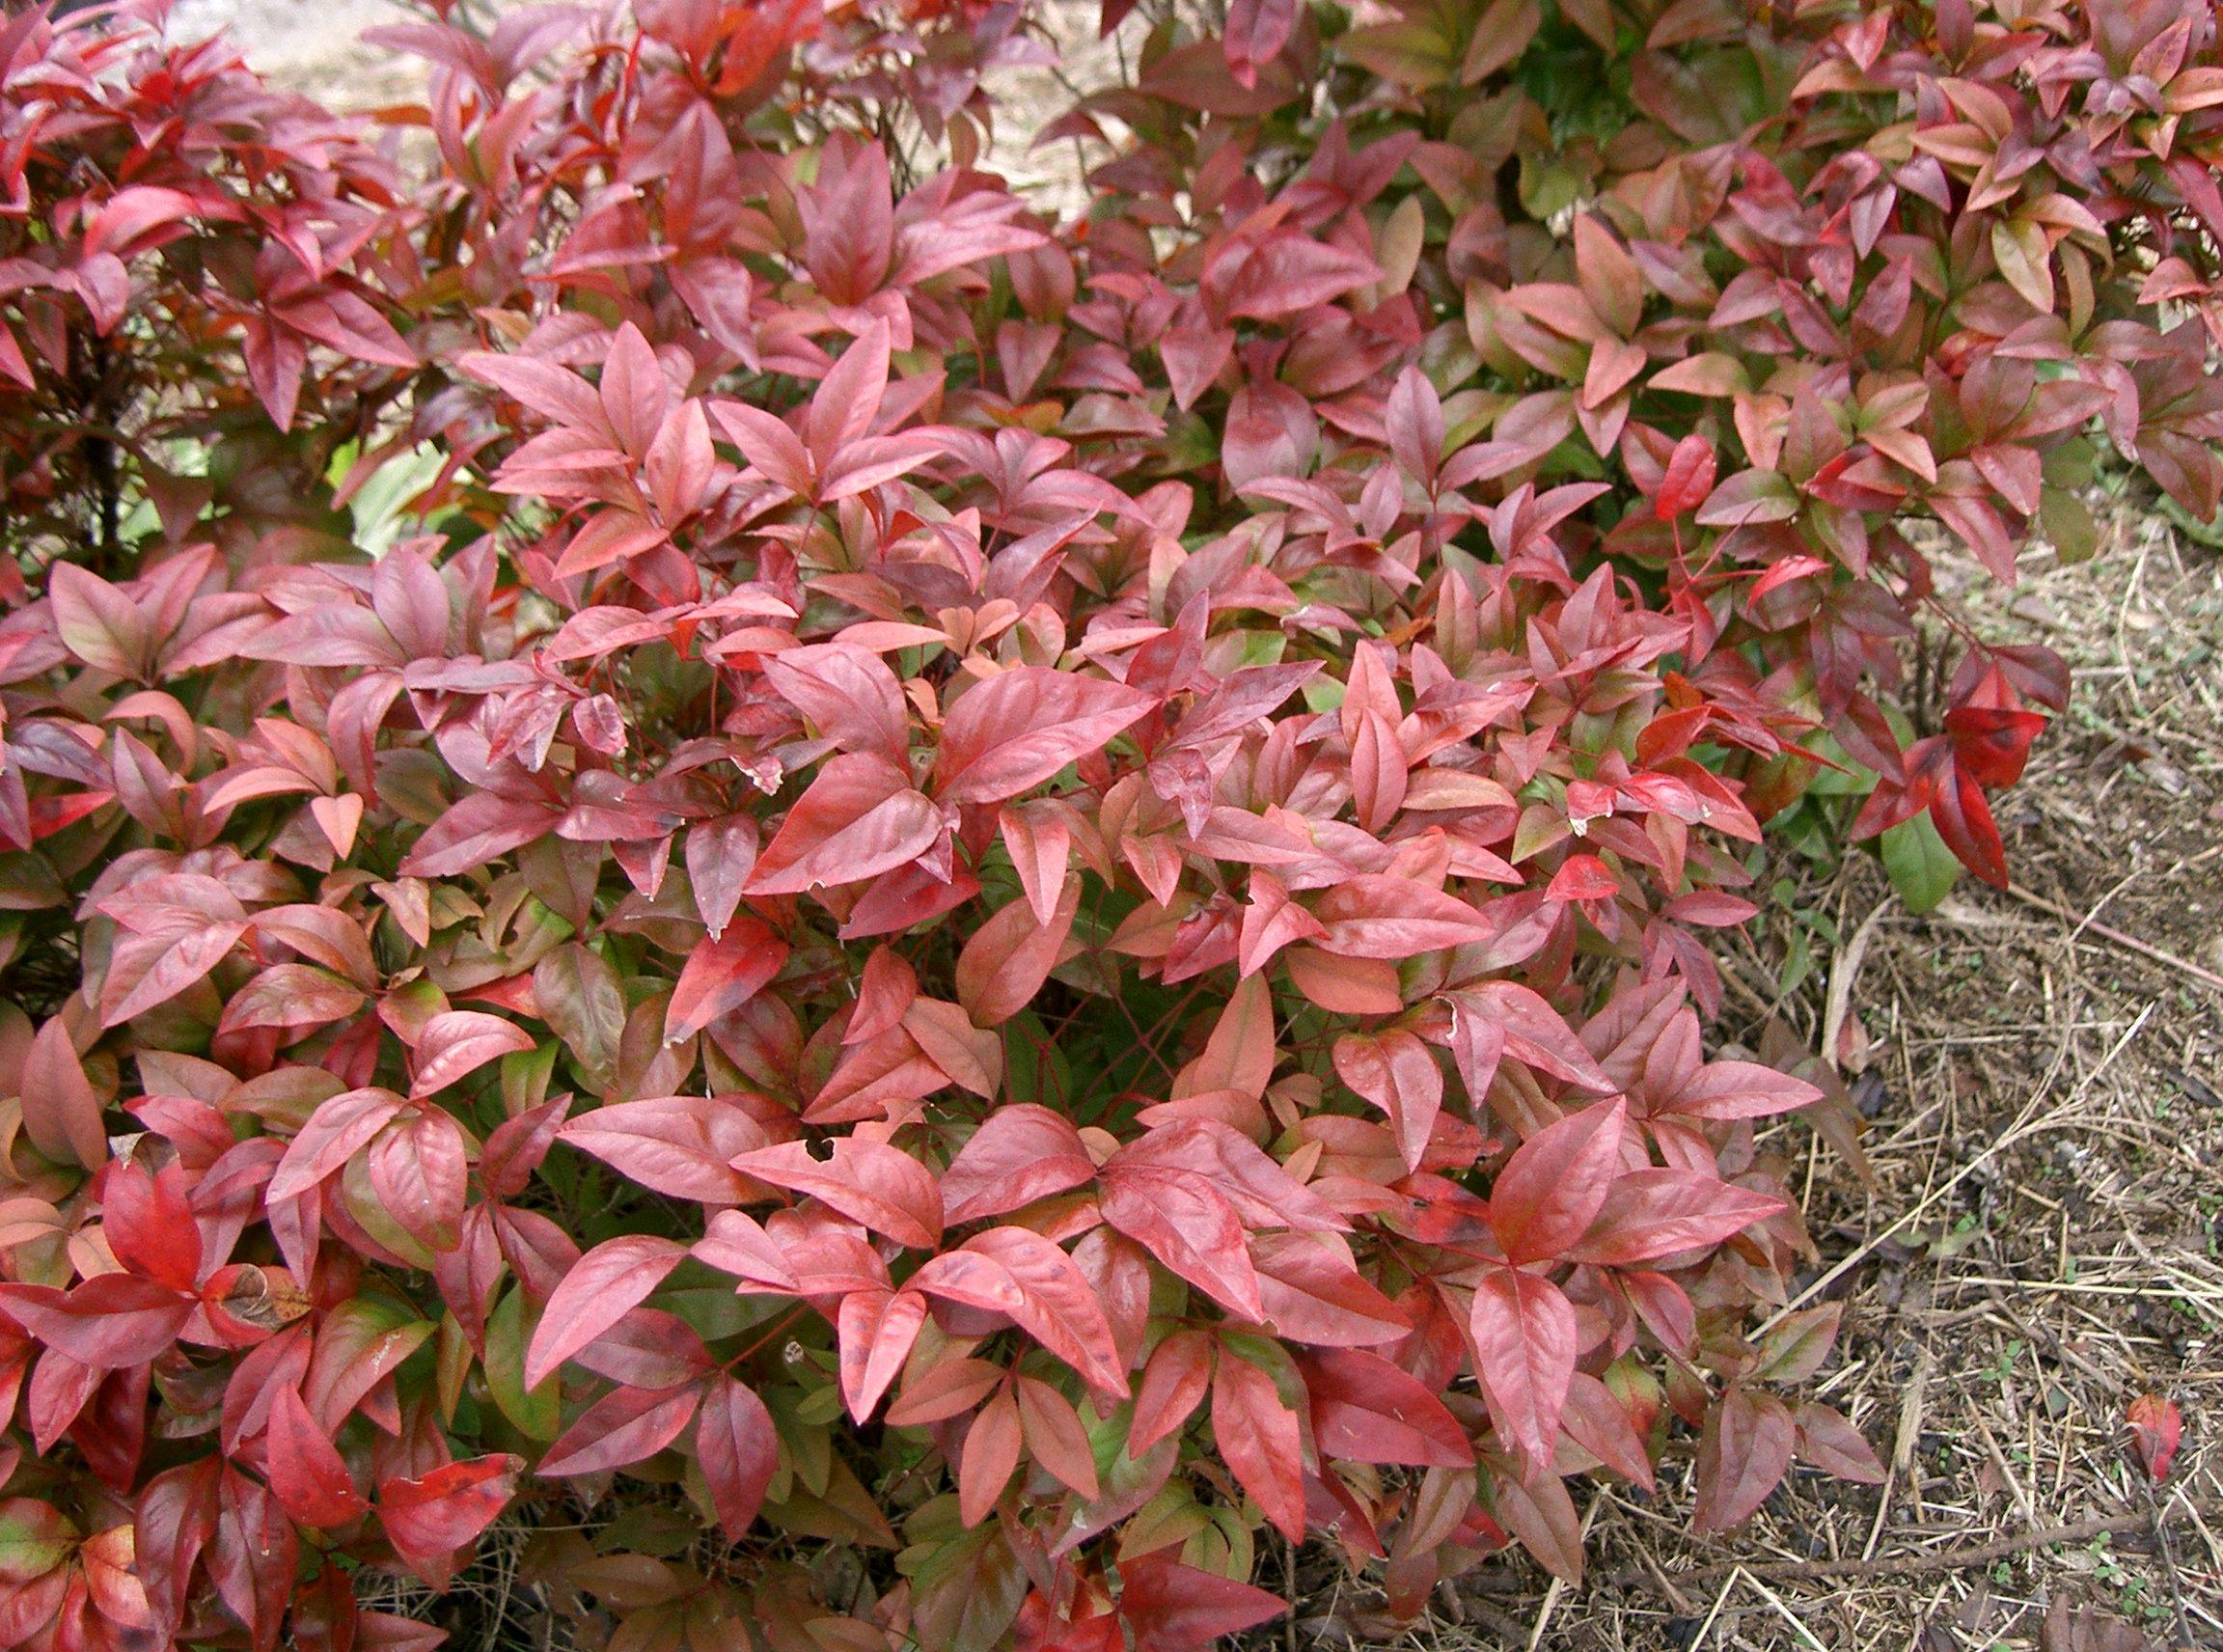 red-lime leaves with red stems